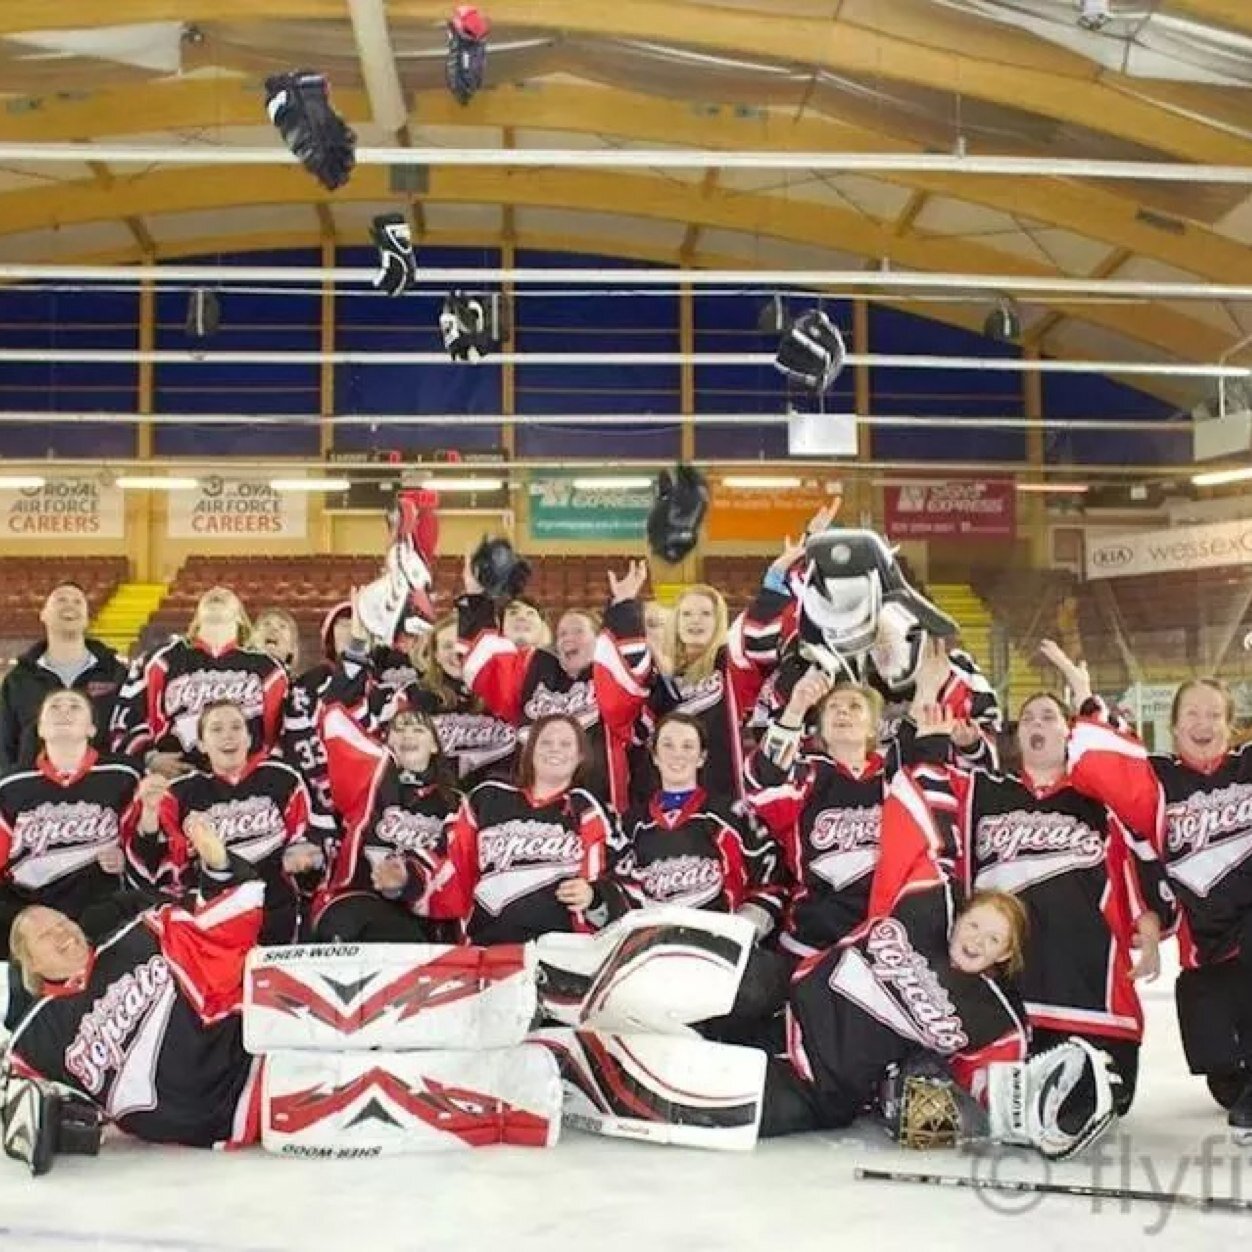 British Women's Ice Hockey Team, playing in division 1 south.